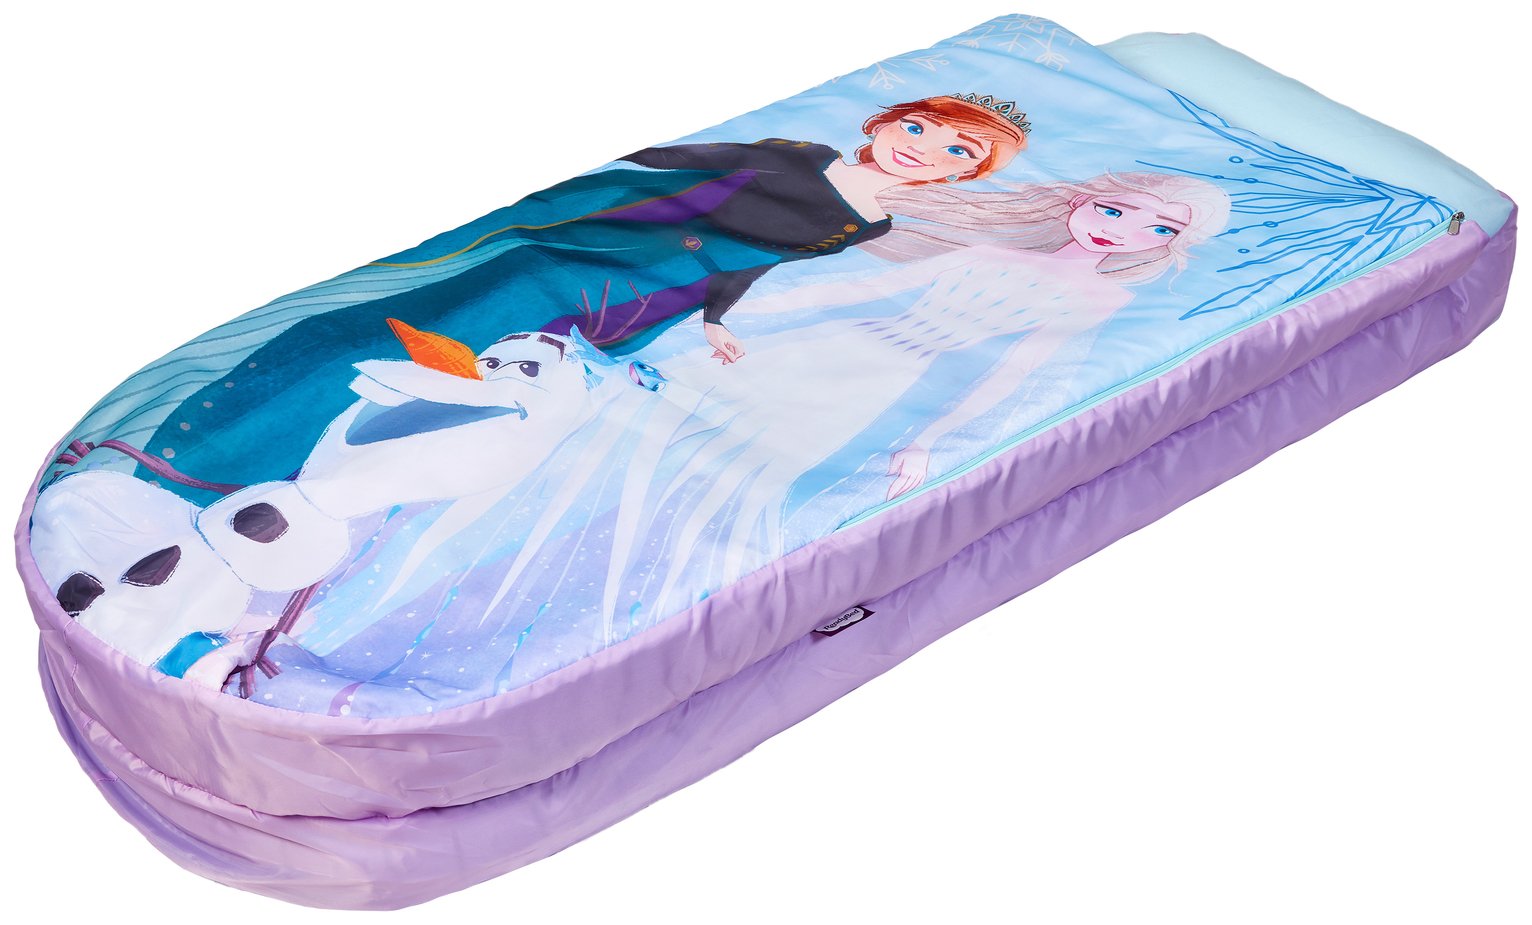 Disney Frozen 2 Junior ReadyBed Air Bed and Sleeping Bag